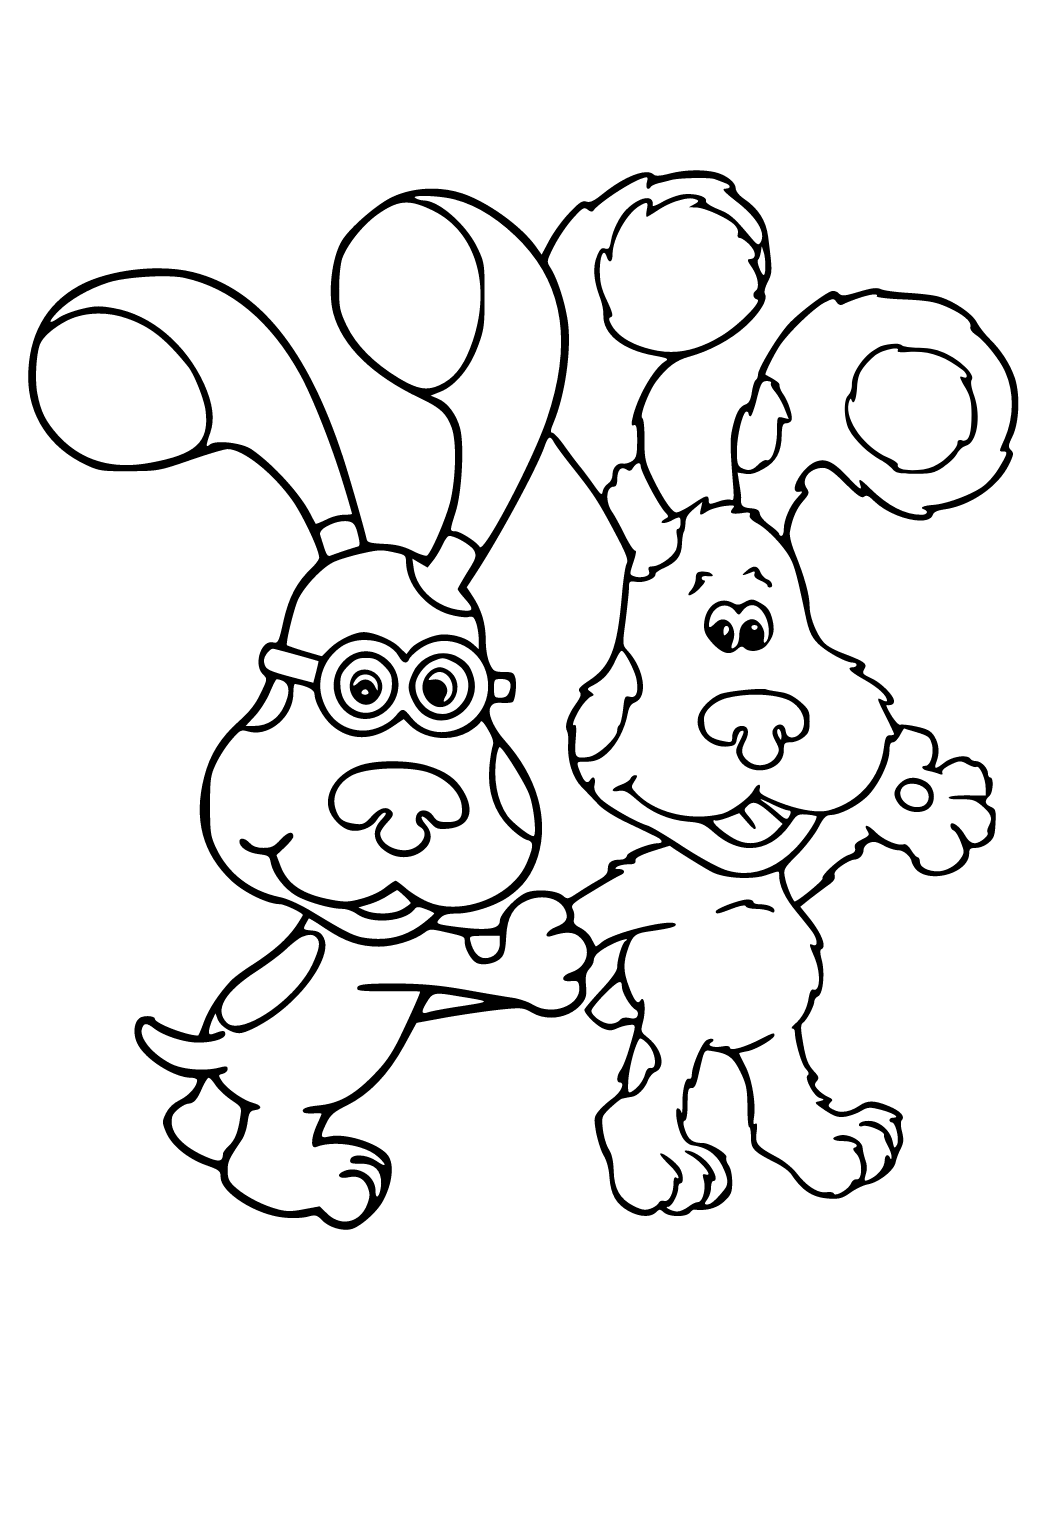 Blue Killed Rainbow Friends Roblox Coloring Page  Coloring pages, Coloring  pages for kids, Hard drawings